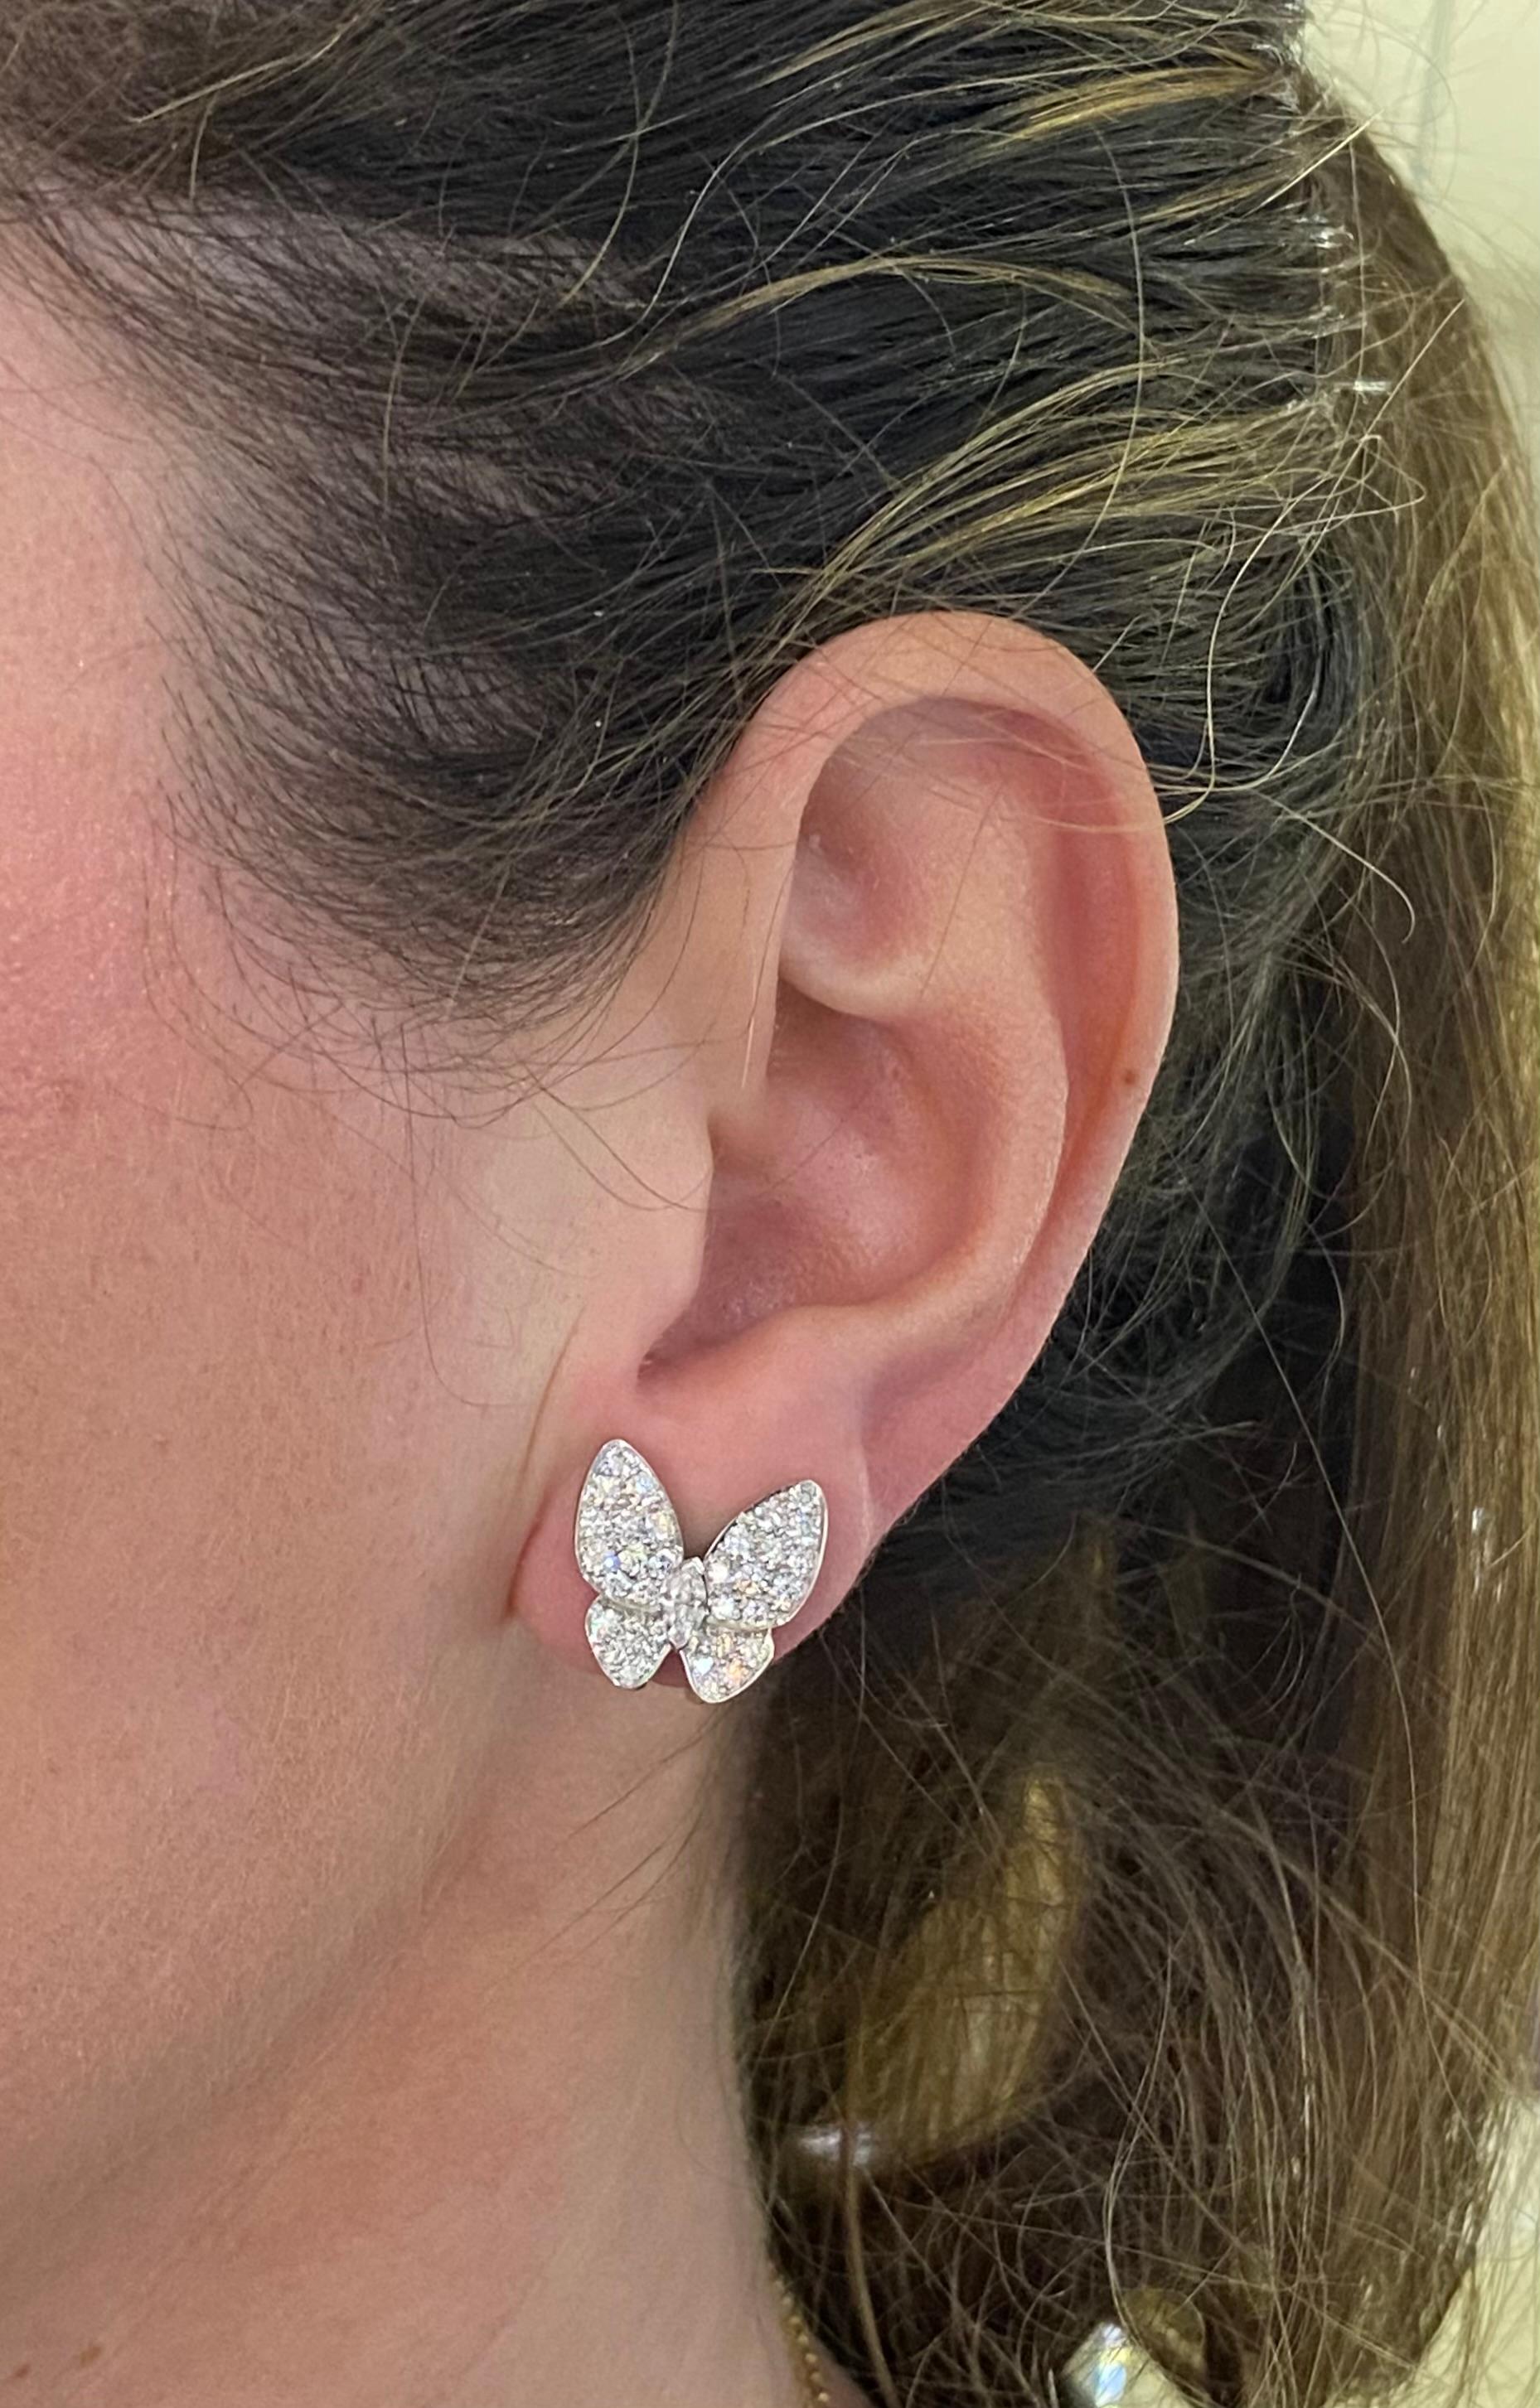 Two Butterfly earrings, 18K white gold, round and marquise-cut diamonds; diamond quality DEF, IF to VVS.
REFERENCE: VCARB82900
STONE: Diamond: 70 stones, 1.67 carats
CLASP: Clip back in white gold